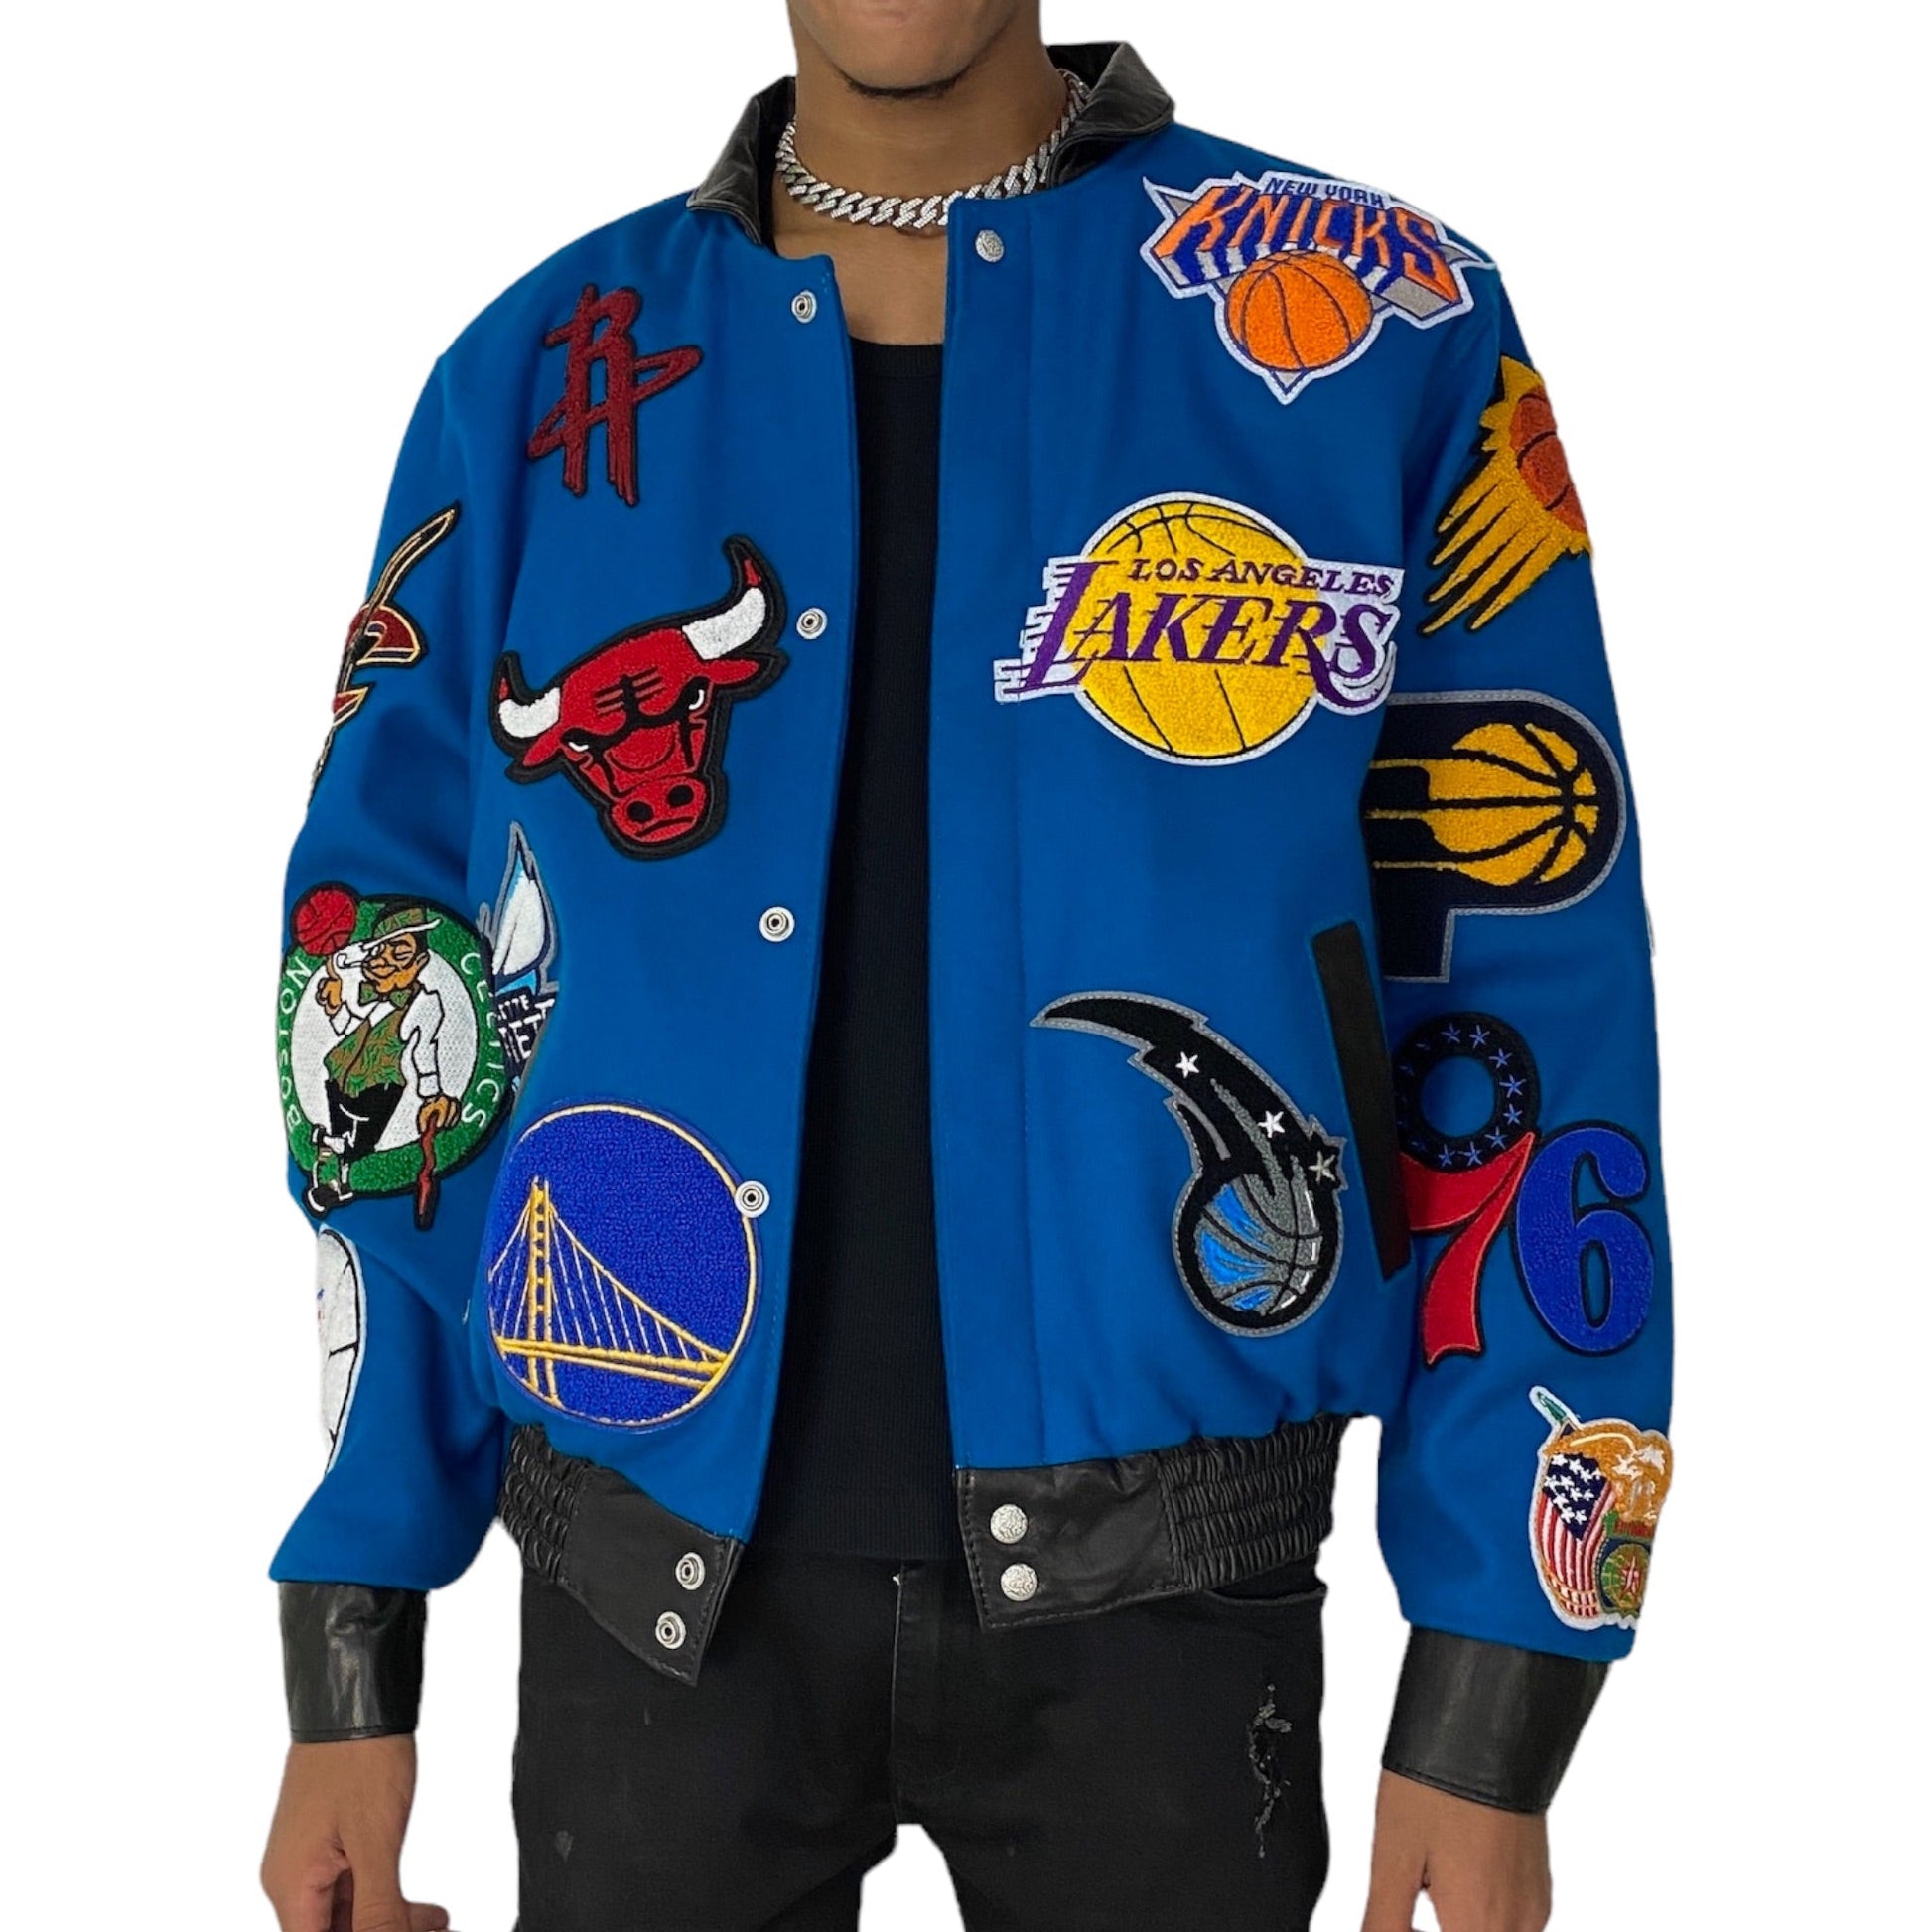 NBA Collage Wool & Leather Jacket Navy